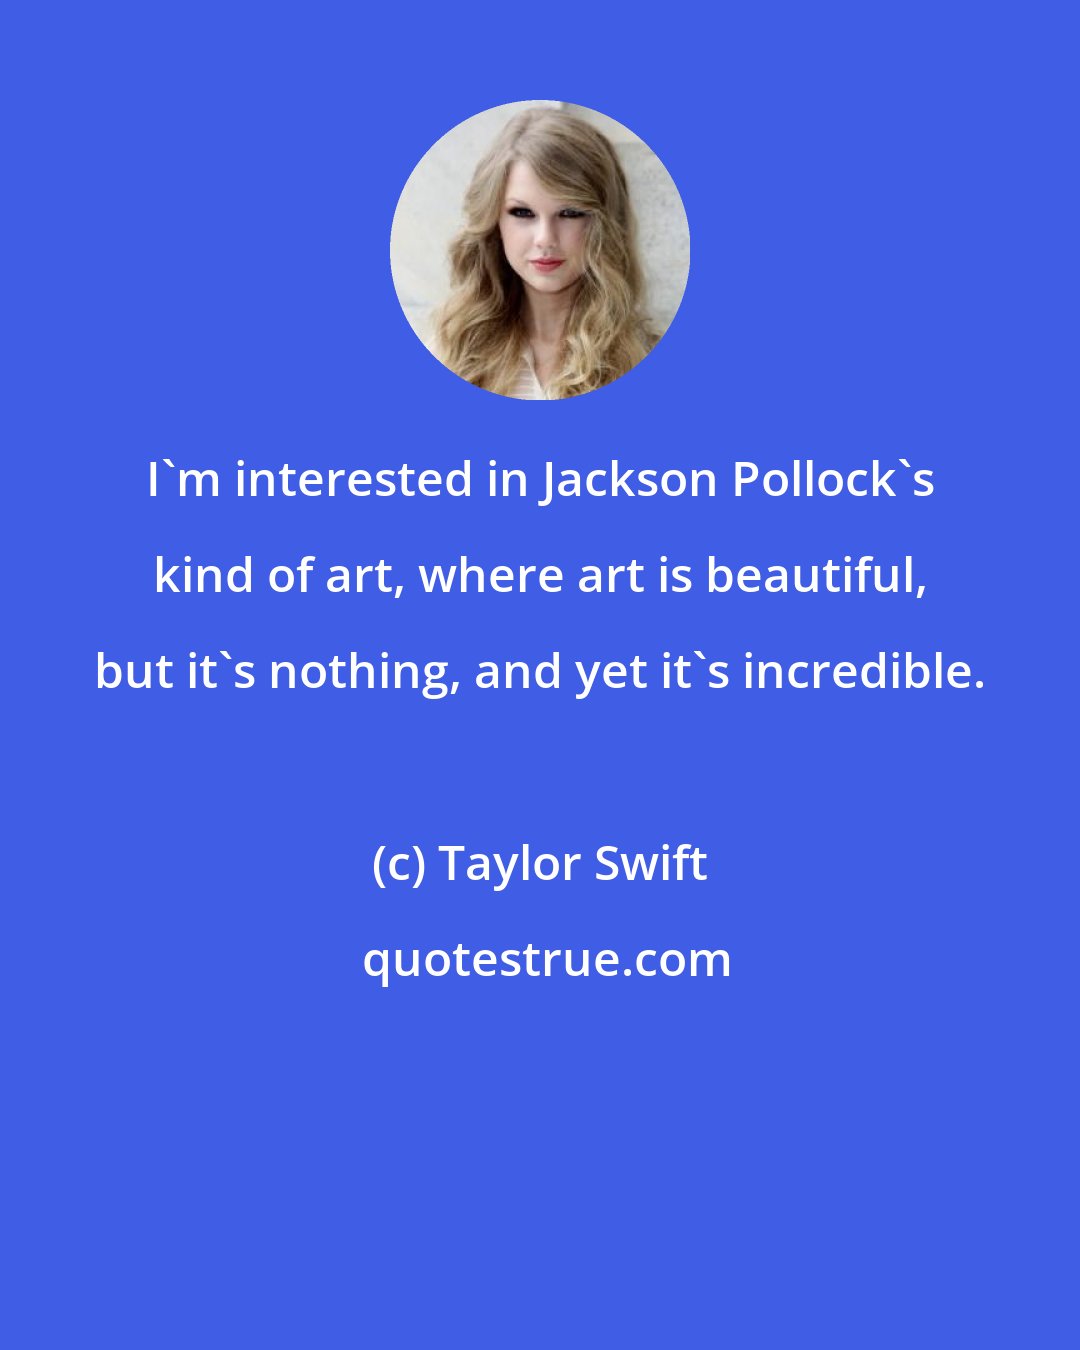 Taylor Swift: I'm interested in Jackson Pollock's kind of art, where art is beautiful, but it's nothing, and yet it's incredible.